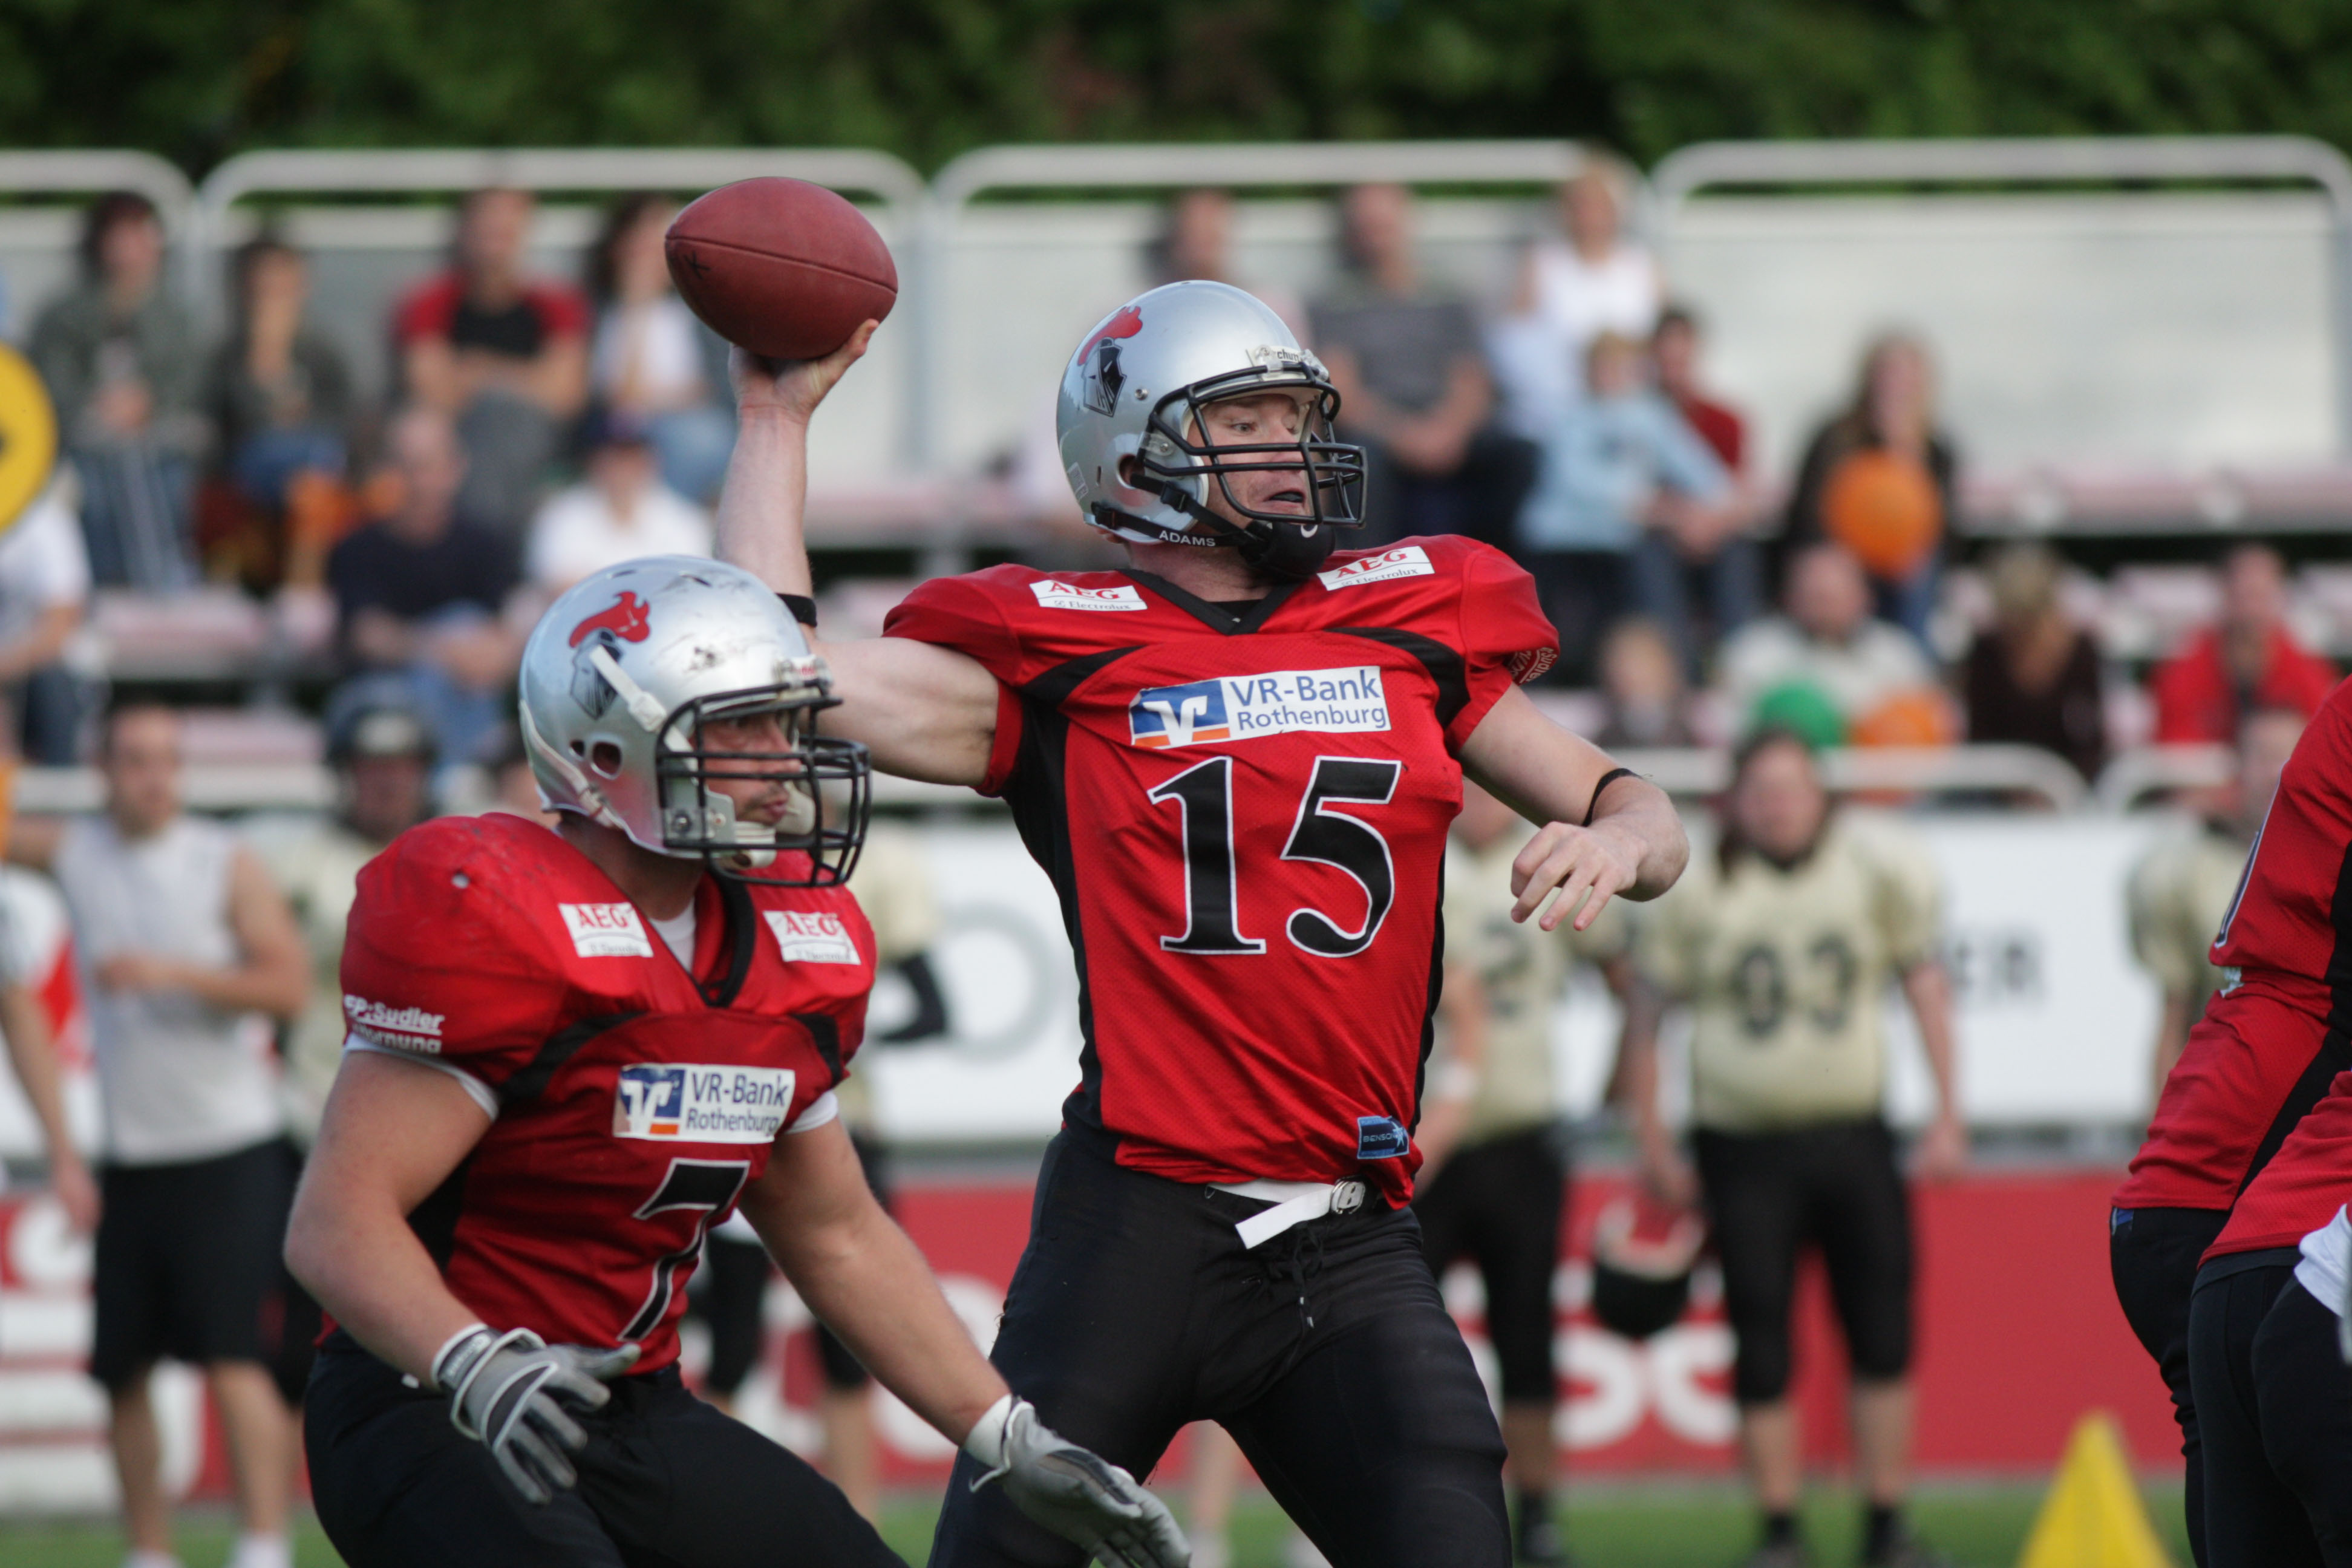 German American football club offers a taste of home | Article | The ...